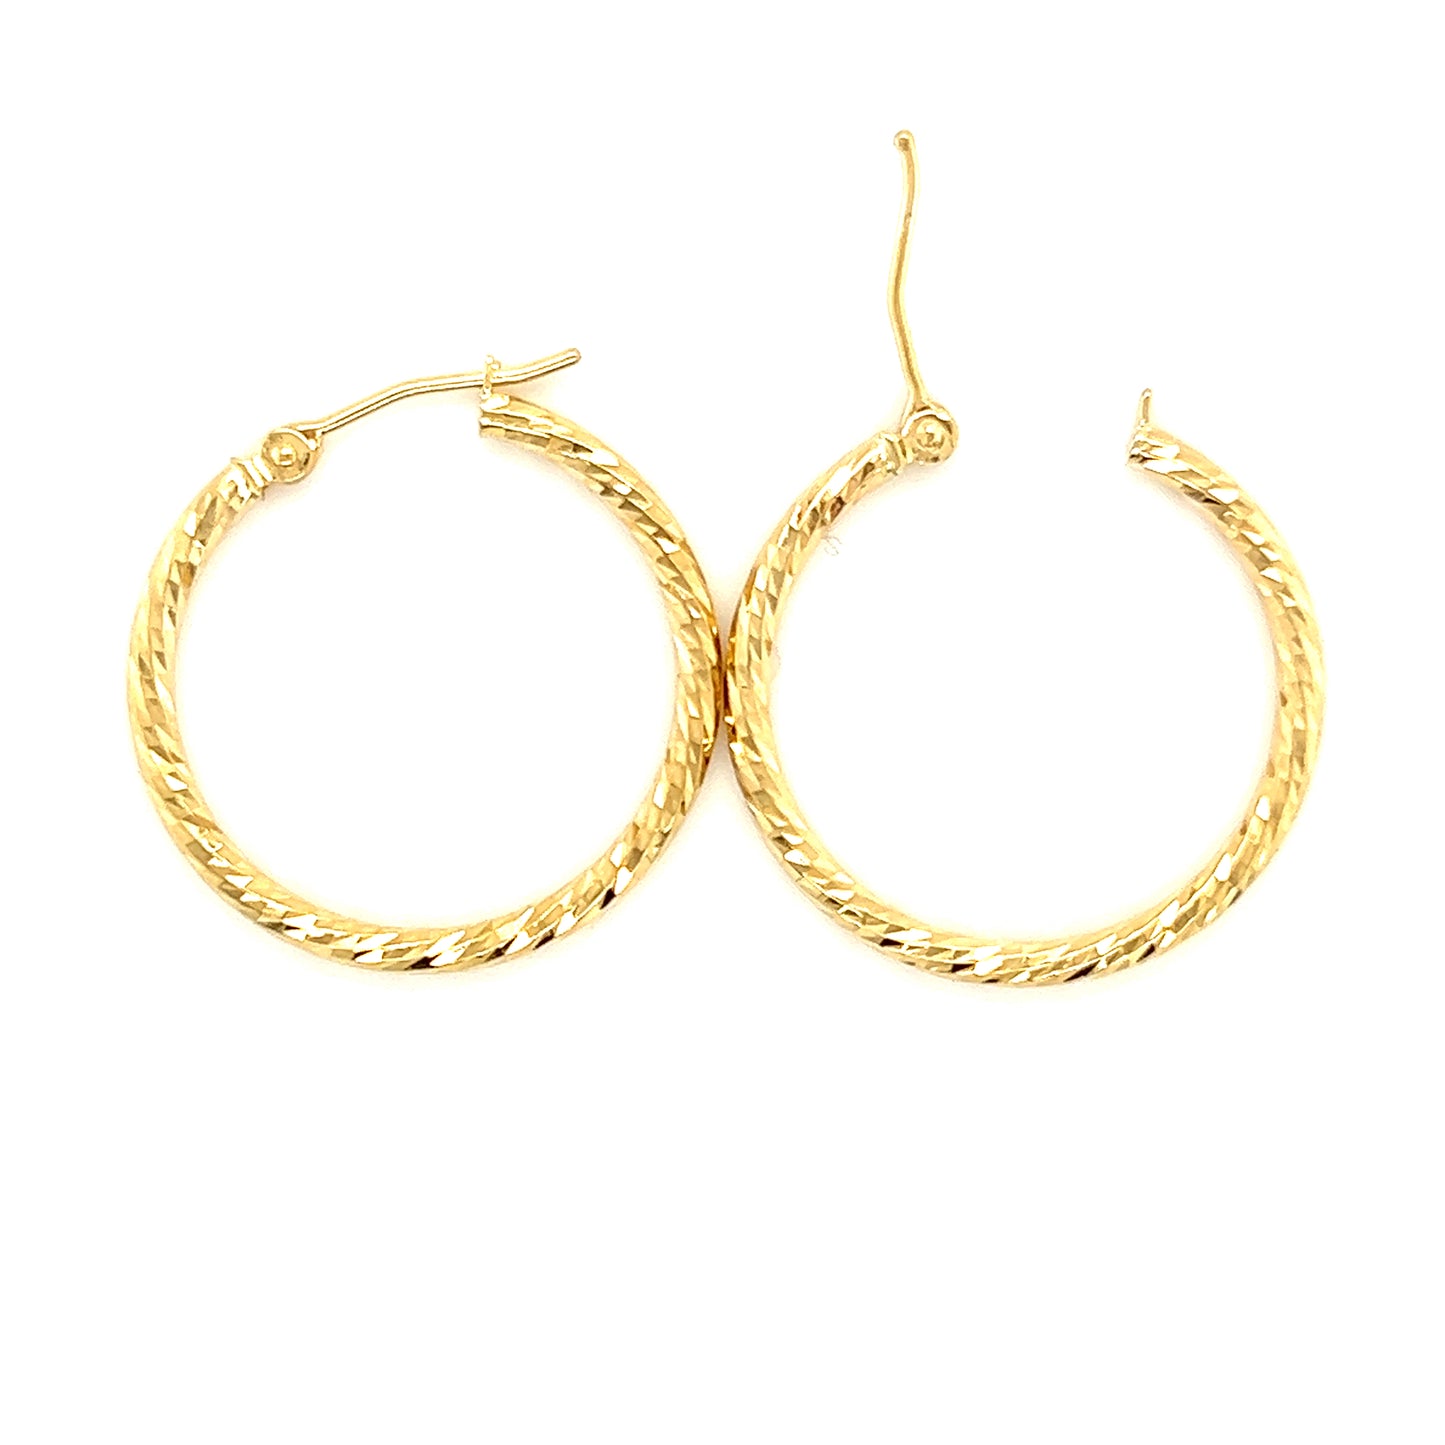 Round Hoop 25.5mm Earrings with Diamond-cut Finish in 14K Yellow Gold Top View with Open Clasp